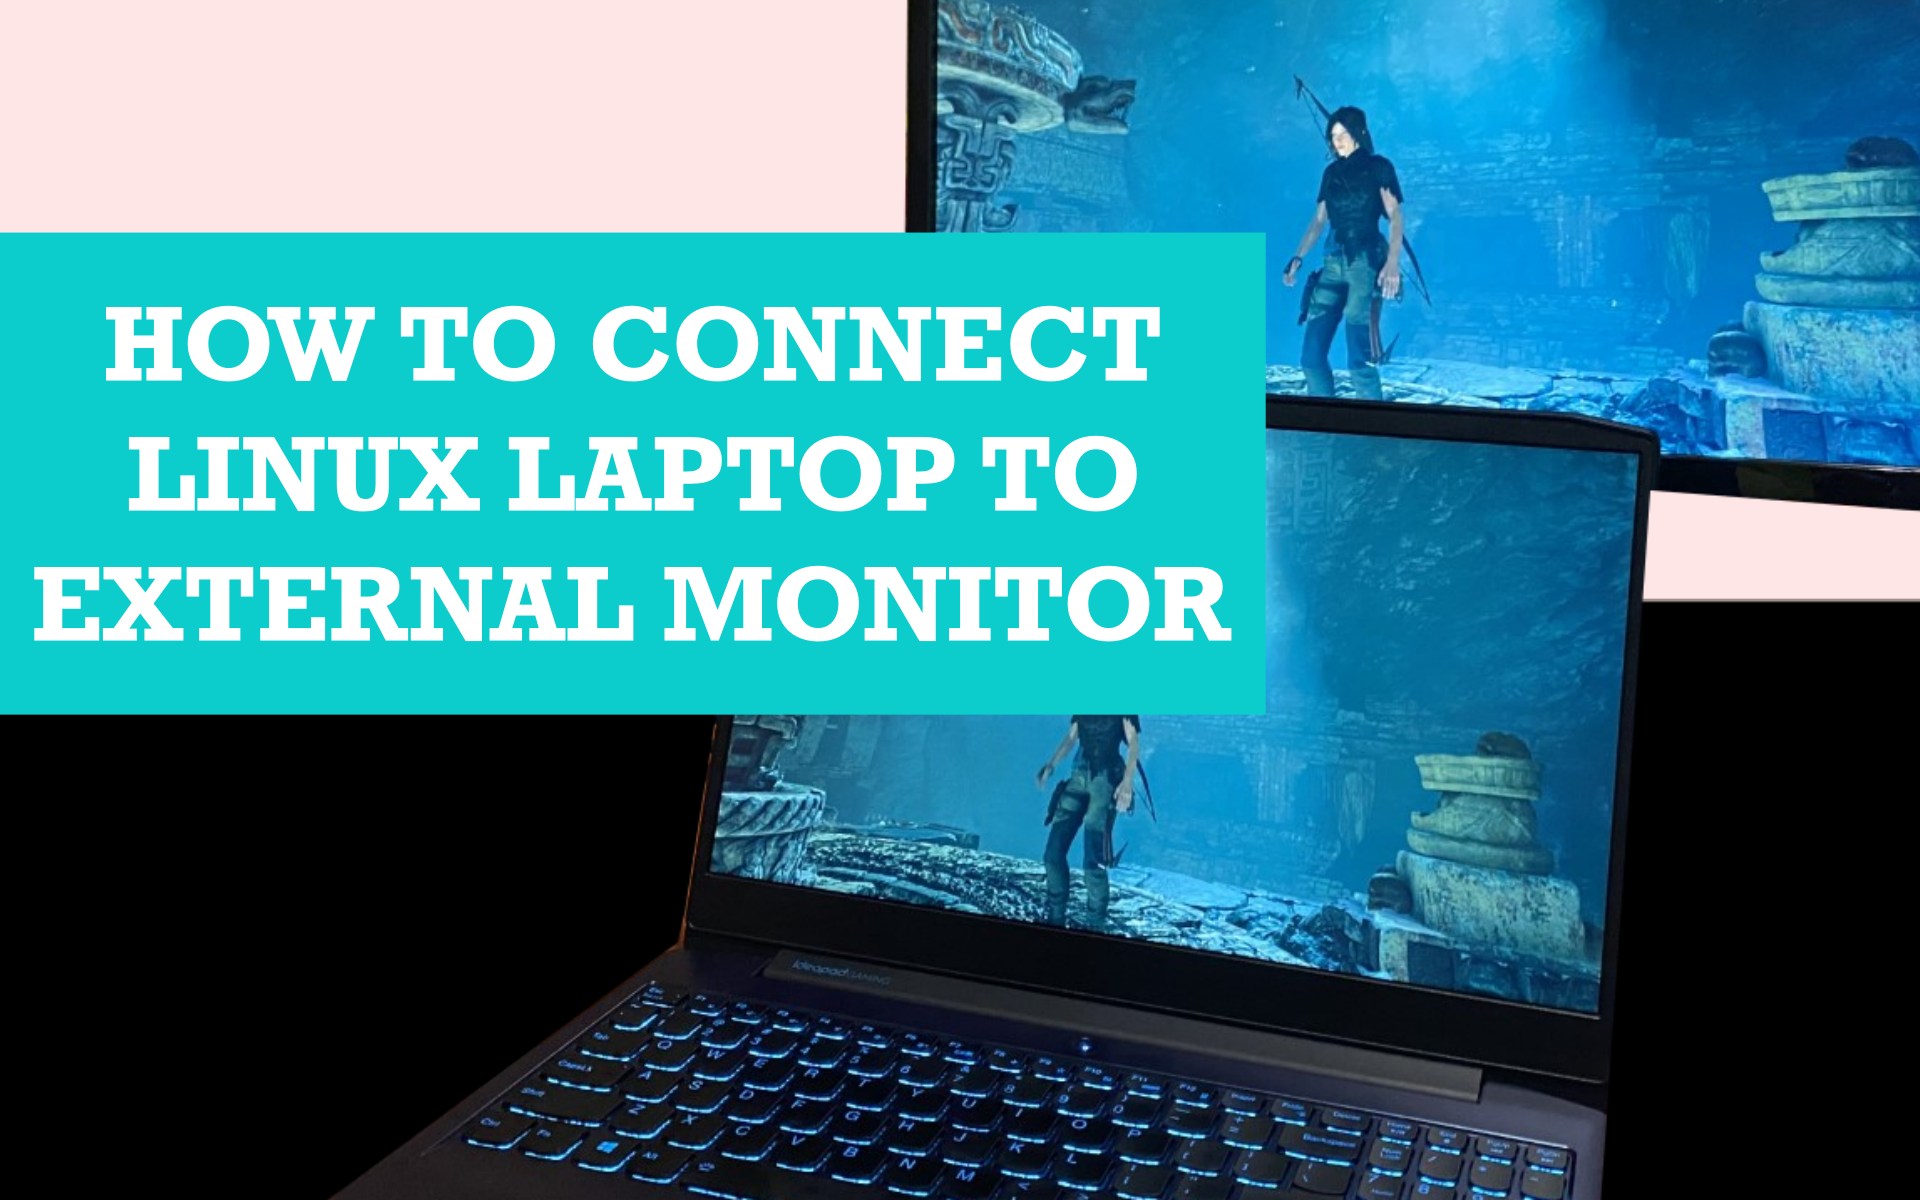 How to Connect Your Linux Laptop to an External Monitor (Fix for HDMI “No Signal” Issue)